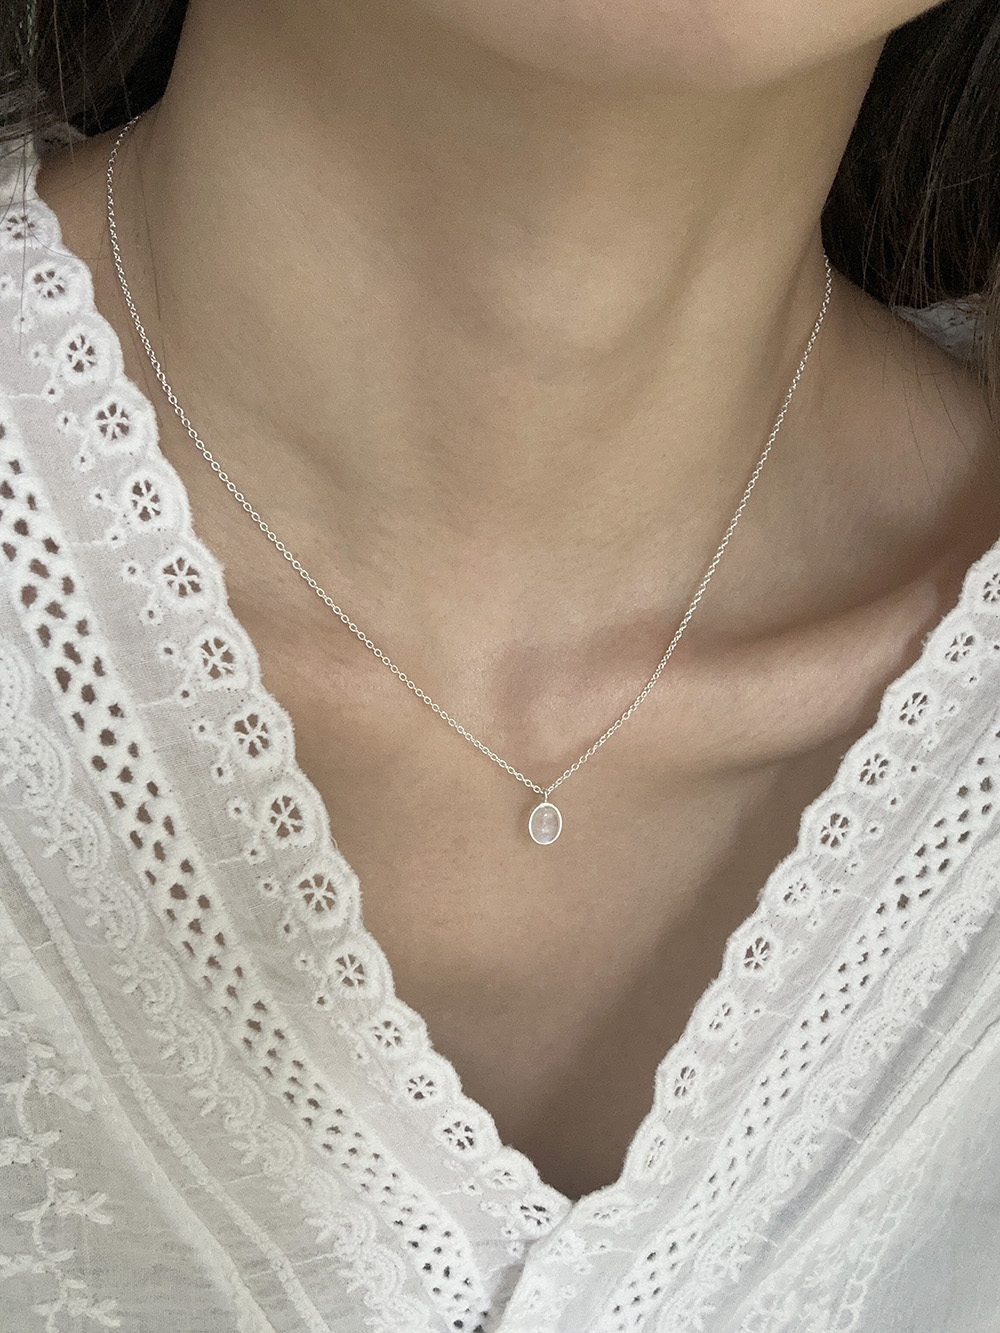 [92.5 silver] Small moonstone necklace